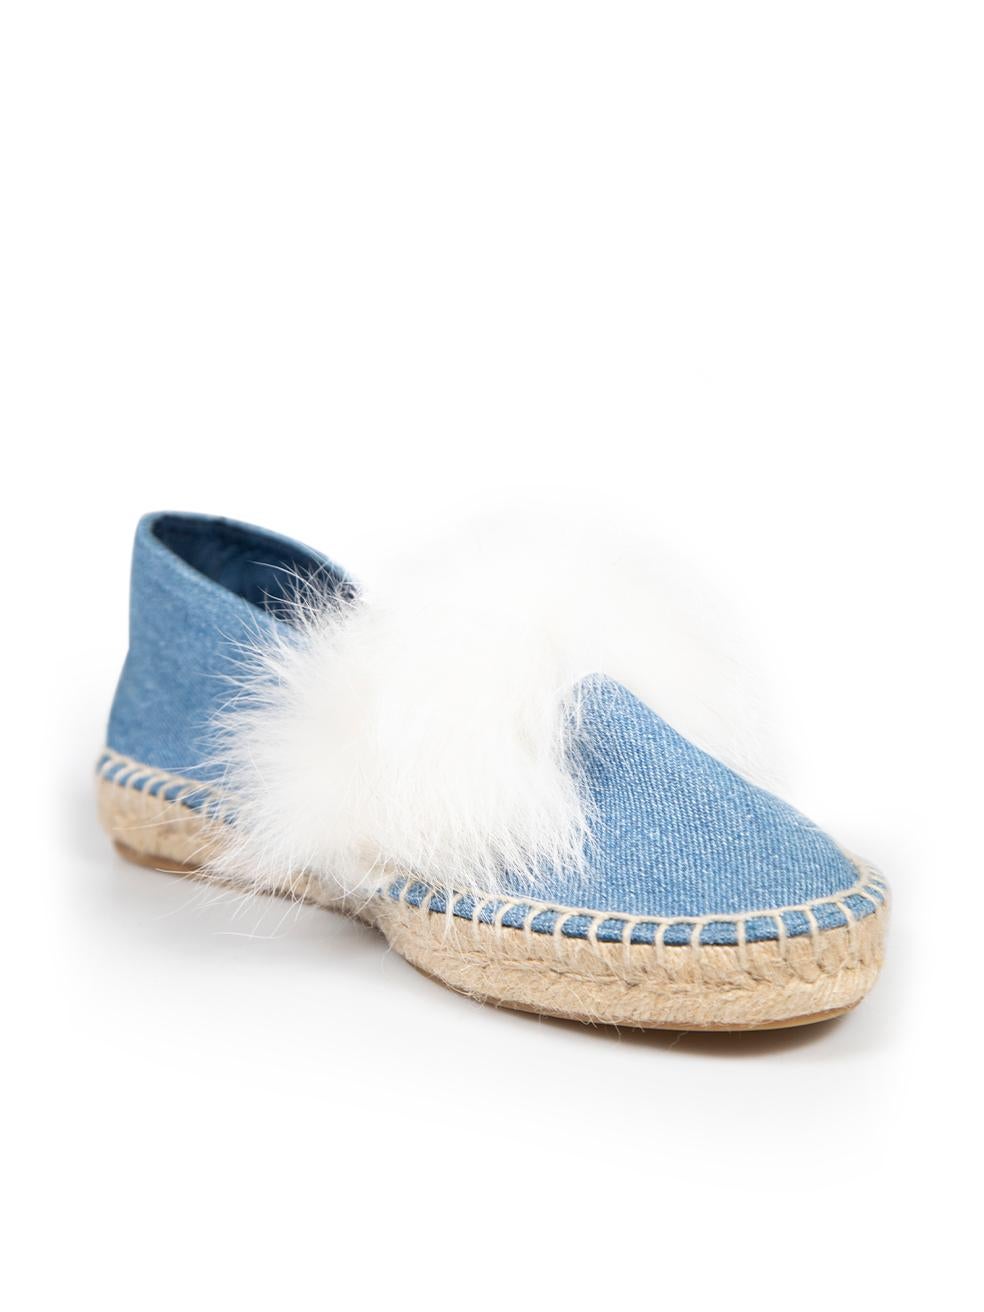 CONDITION is Very good. Minimal wear to espadrilles is evident. Minimal wear to back of right shoe with a small mark to the denim heel on this used Yves Salomon designer resale item.
 
 
 
 Details
 
 
 Blue
 
 Denim
 
 Espadrilles
 
 White fur